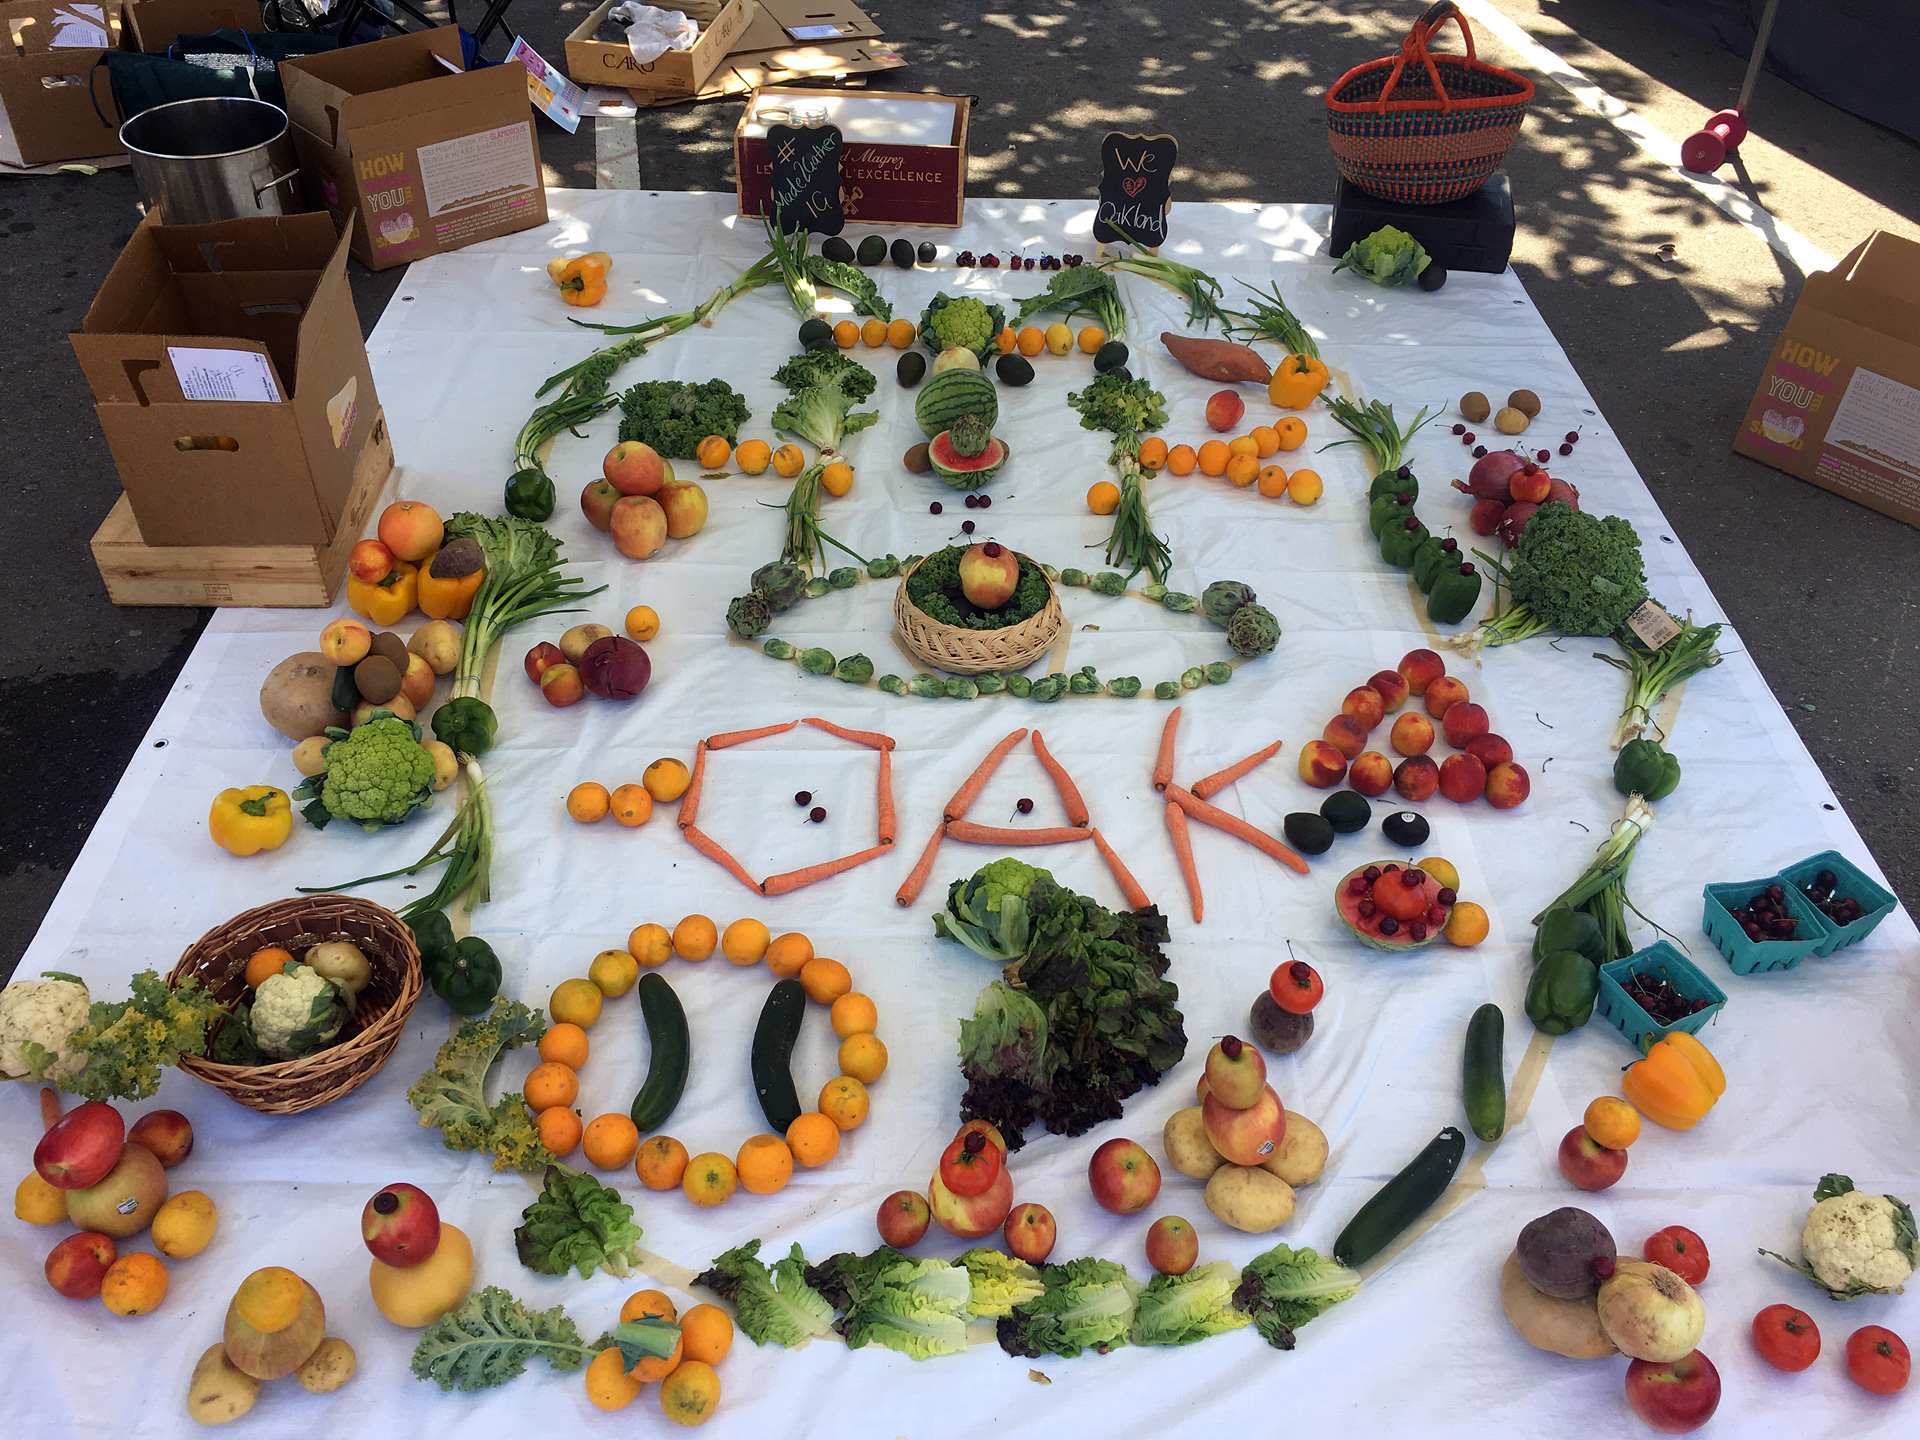 Chef Lee Davidson led a group of people in making this food mandala at Oakland's Eastlake Music Festival.